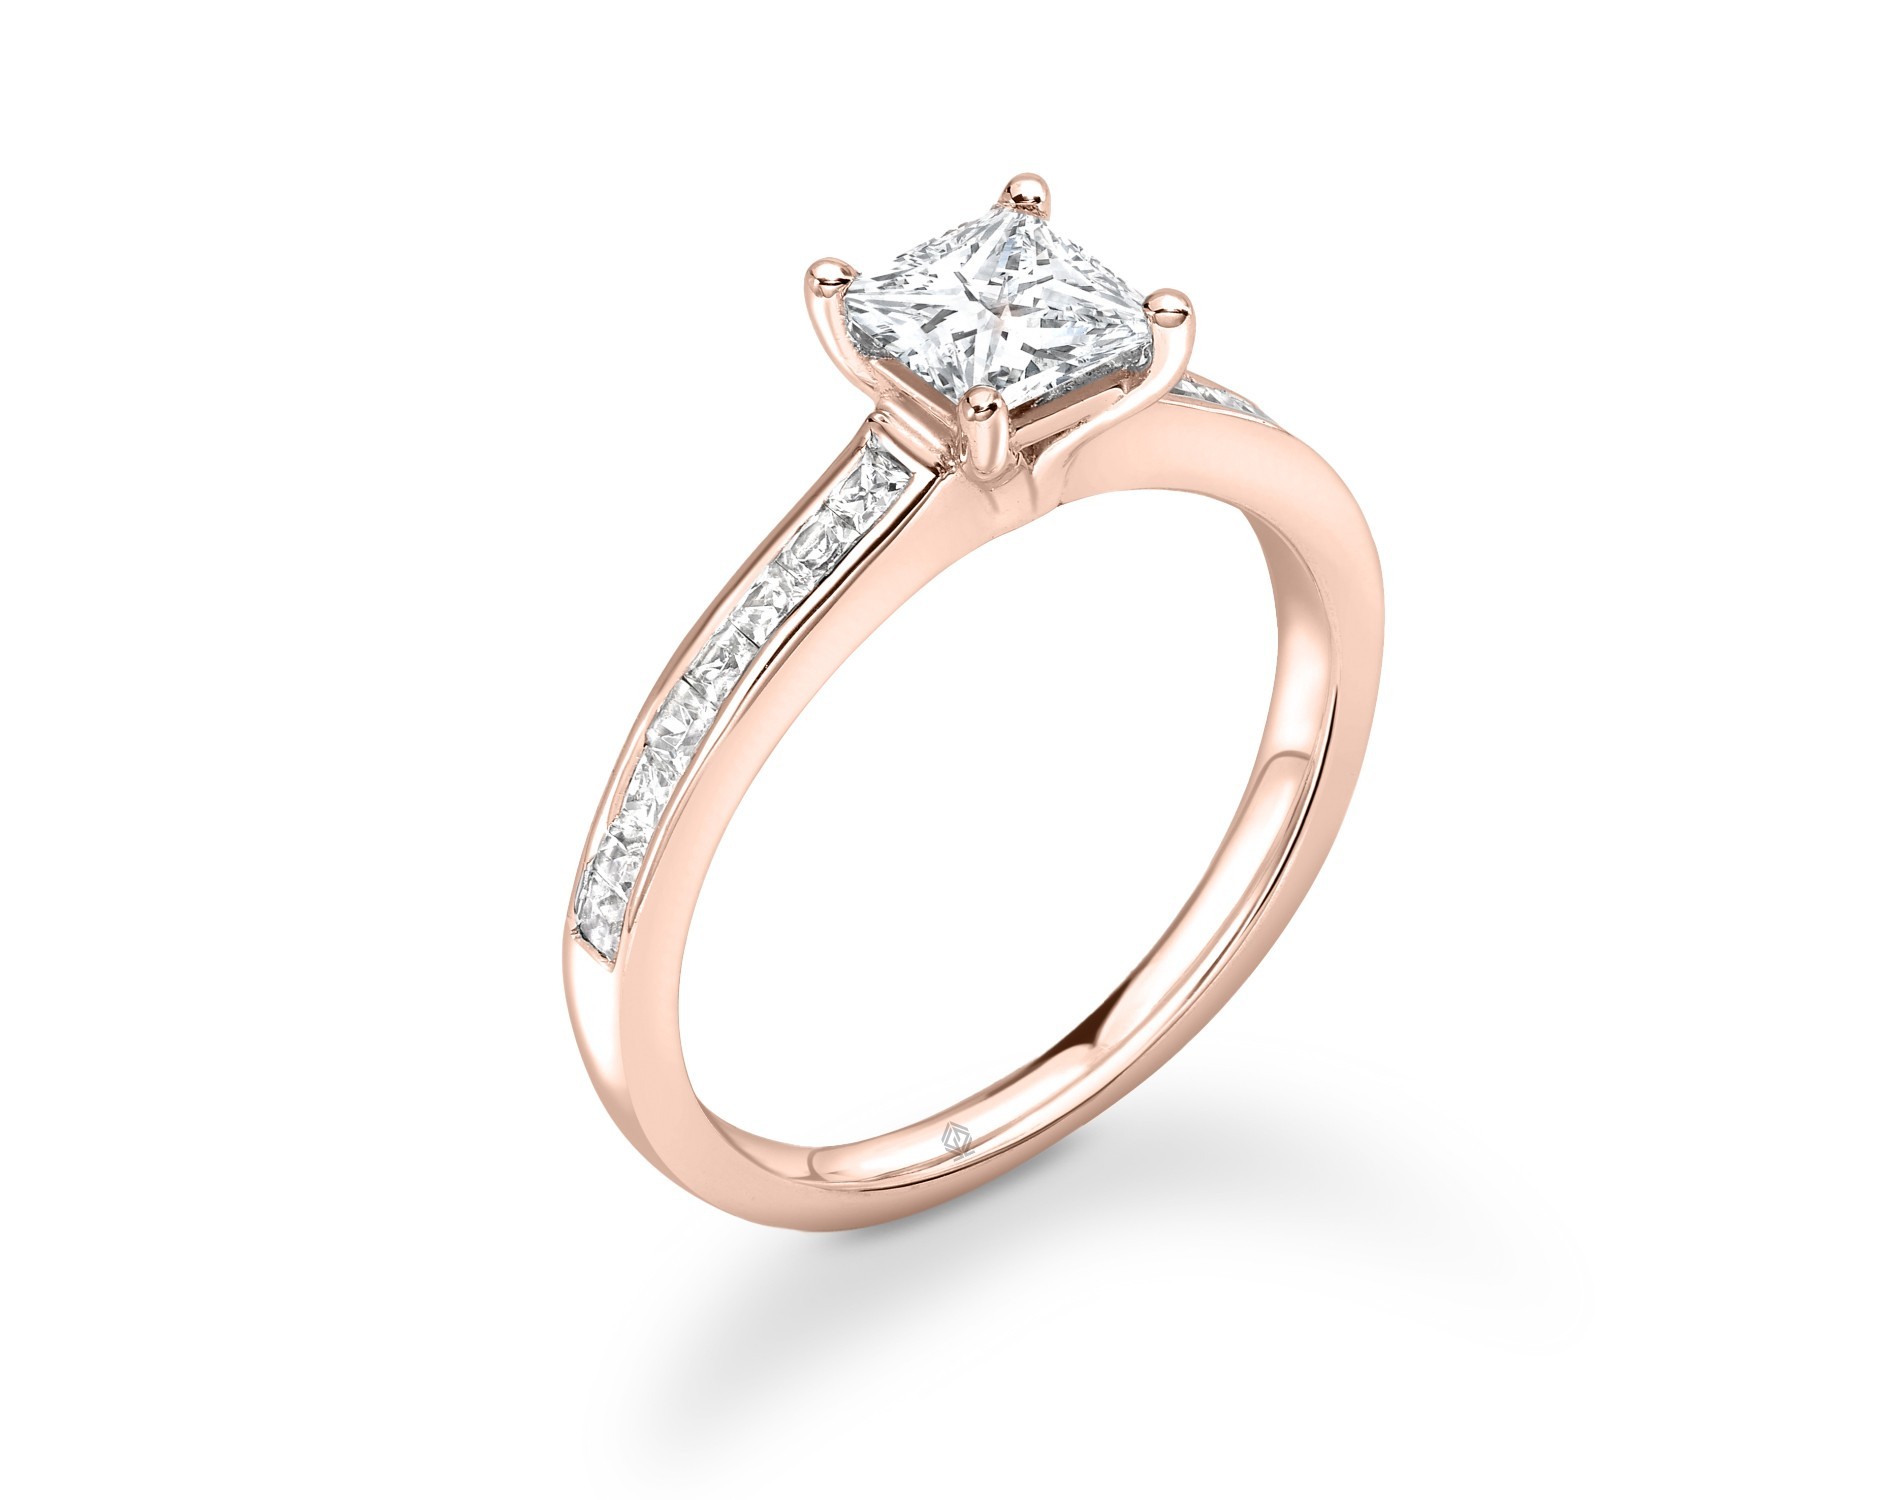 18K ROSE GOLD 4 PRONGS PRINCESS CUT DIAMOND ENGAGEMENT RING WITH SIDE STONES CHANNEL SET